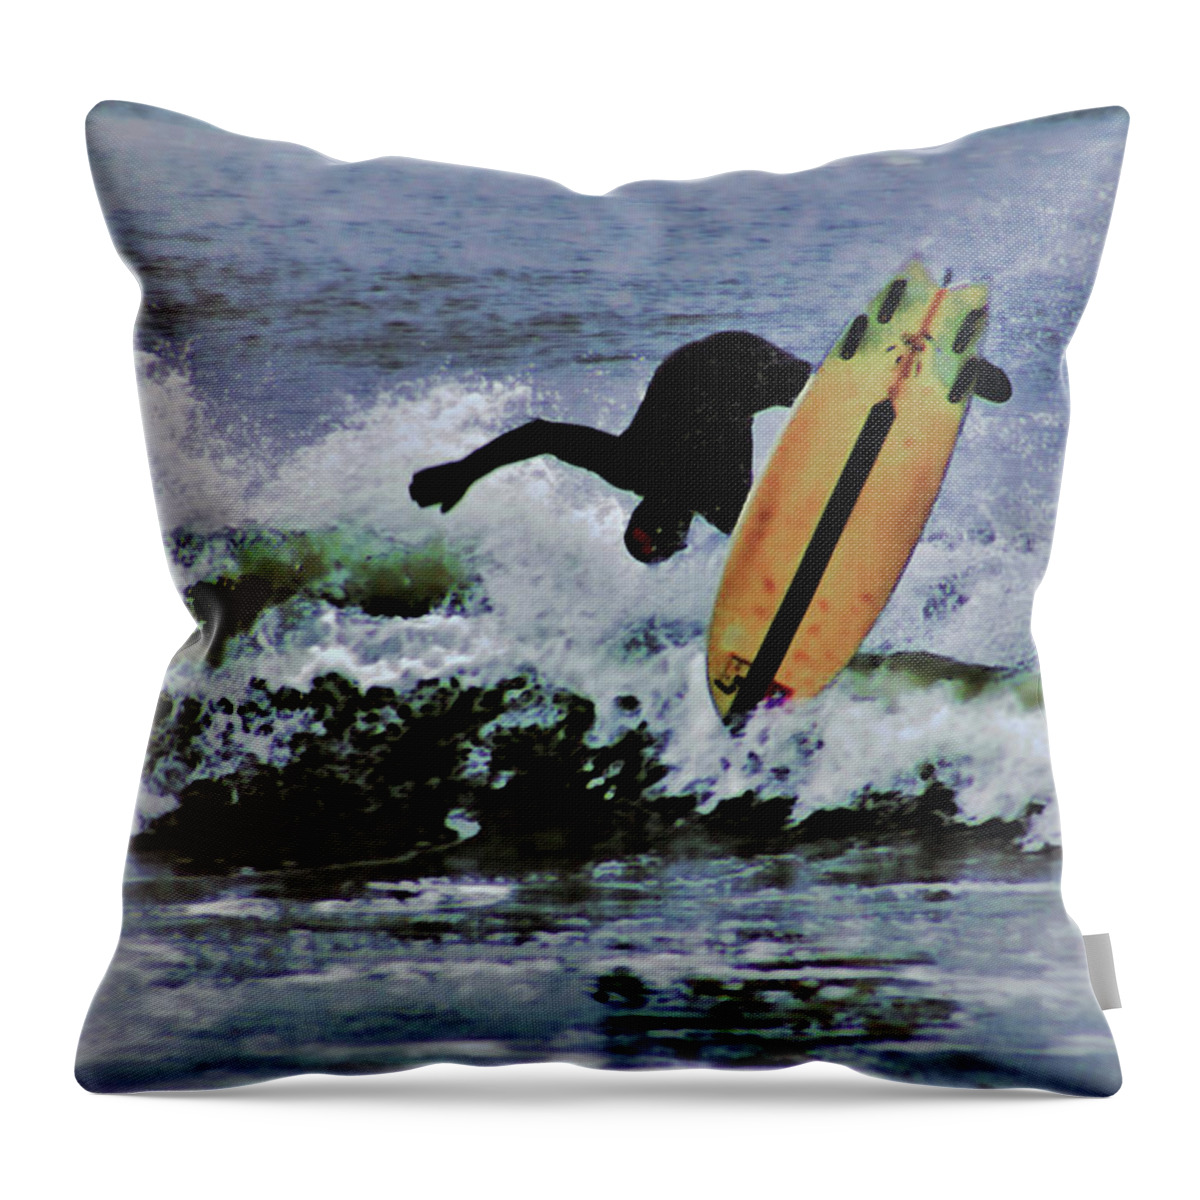 Surf Board Throw Pillow featuring the photograph Surfs Up by M Three Photos